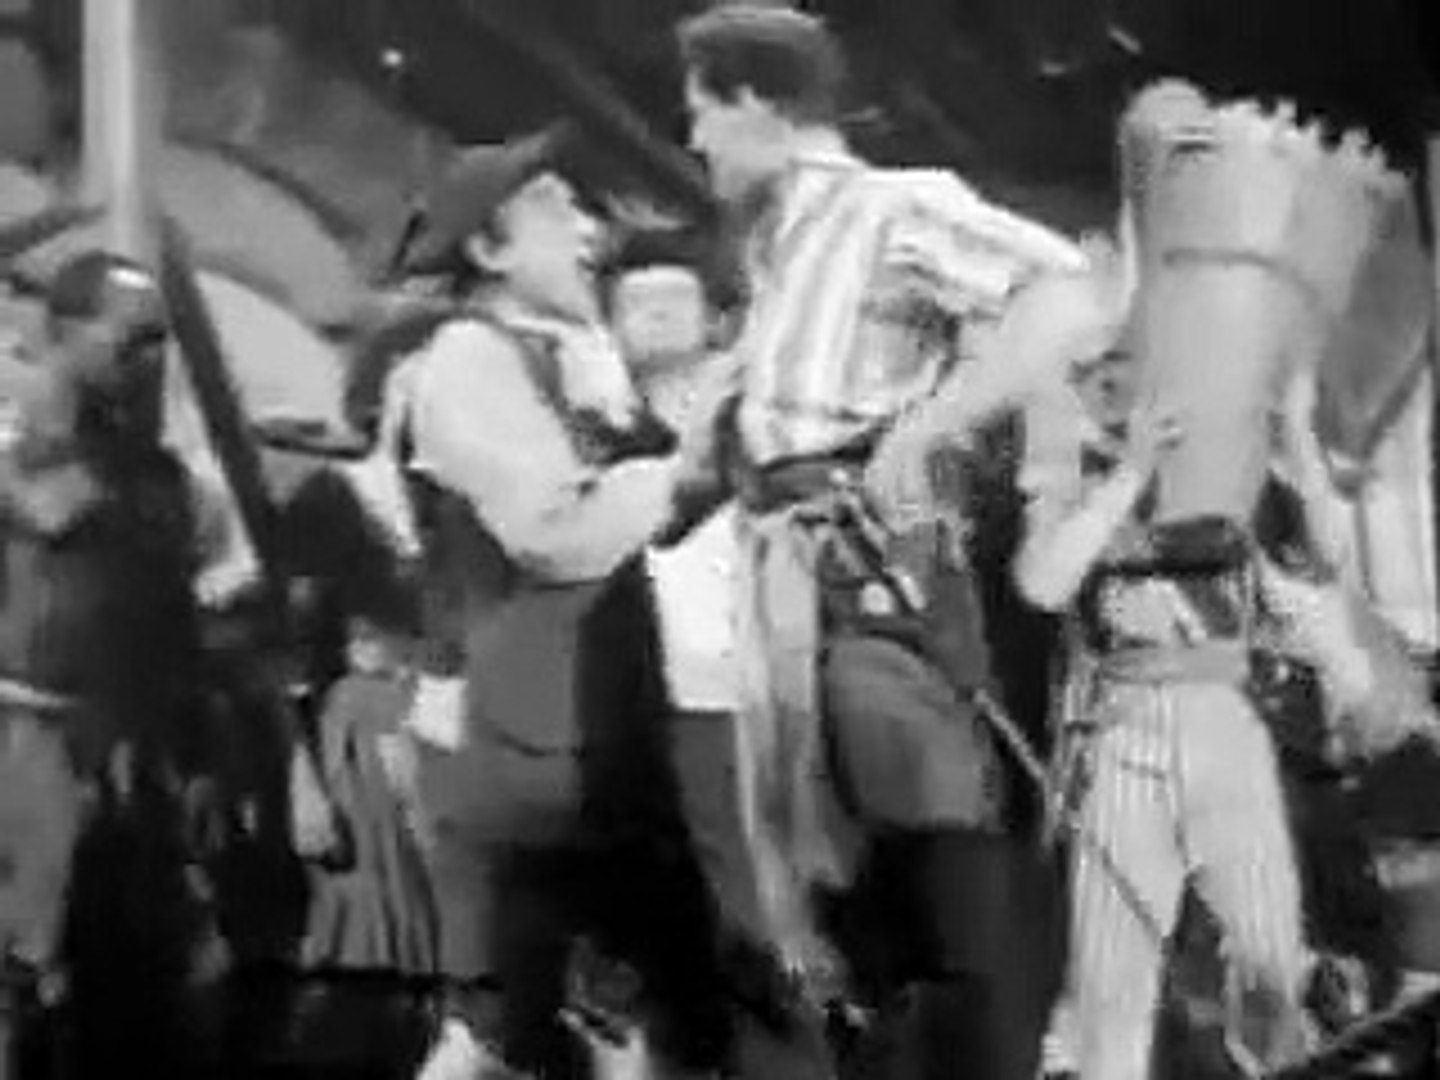 The Buccaneers - Captain Dan Tempest - Classic TV Show Full Episode -  Dailymotion Video